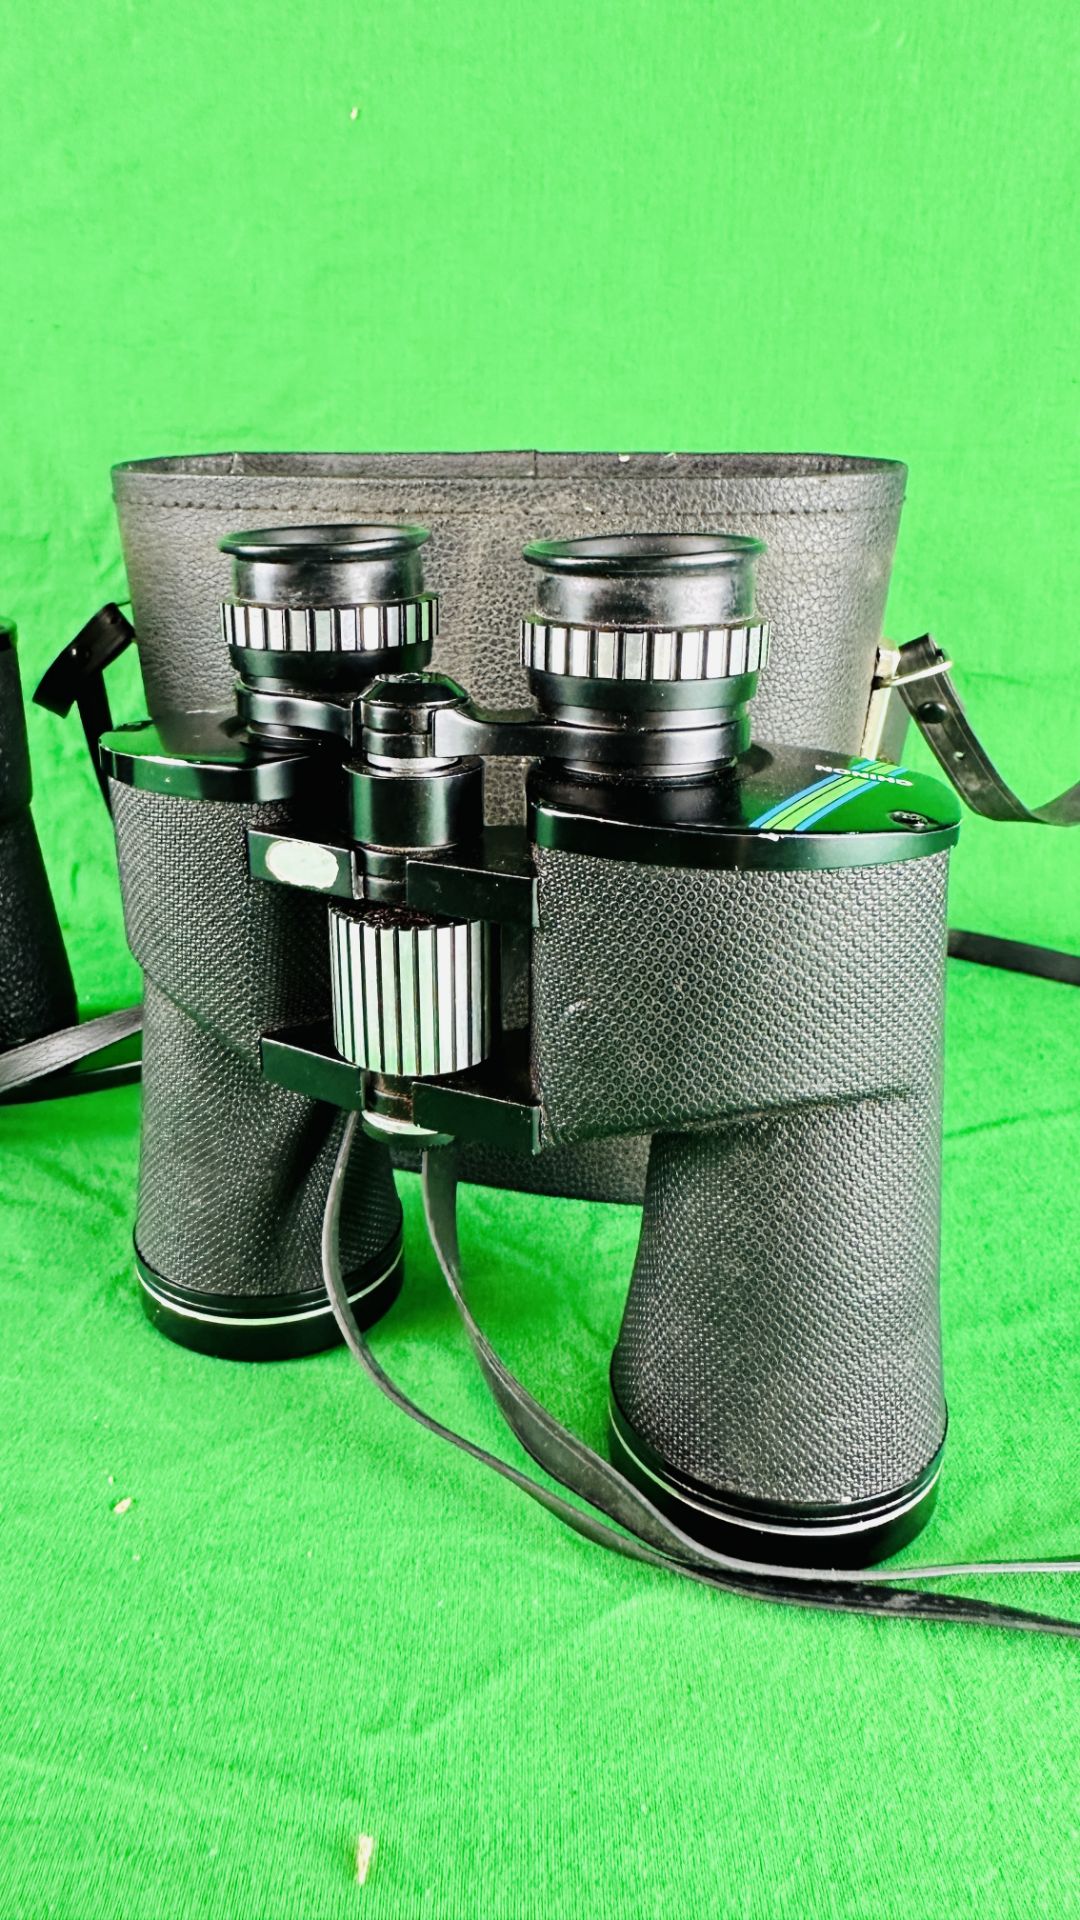 TWO PAIRS OF BINOCULARS INCLUDING CHINON 10X50 FIELD AND CHINON 6X50 - Image 5 of 10